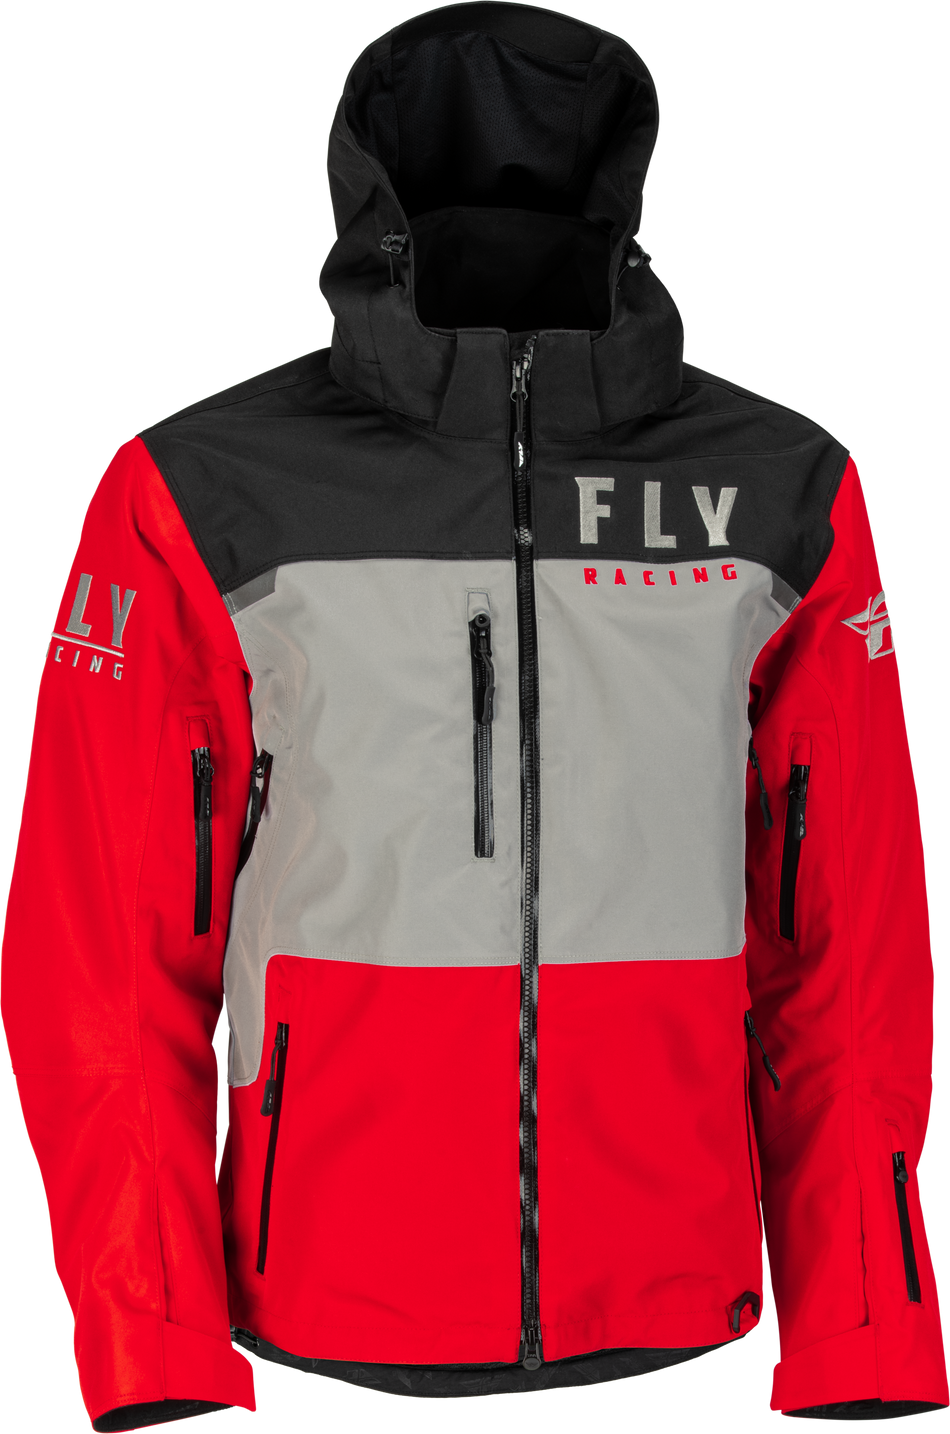 FLY RACING Carbon Jacket Red/Grey Sm 470-4134S